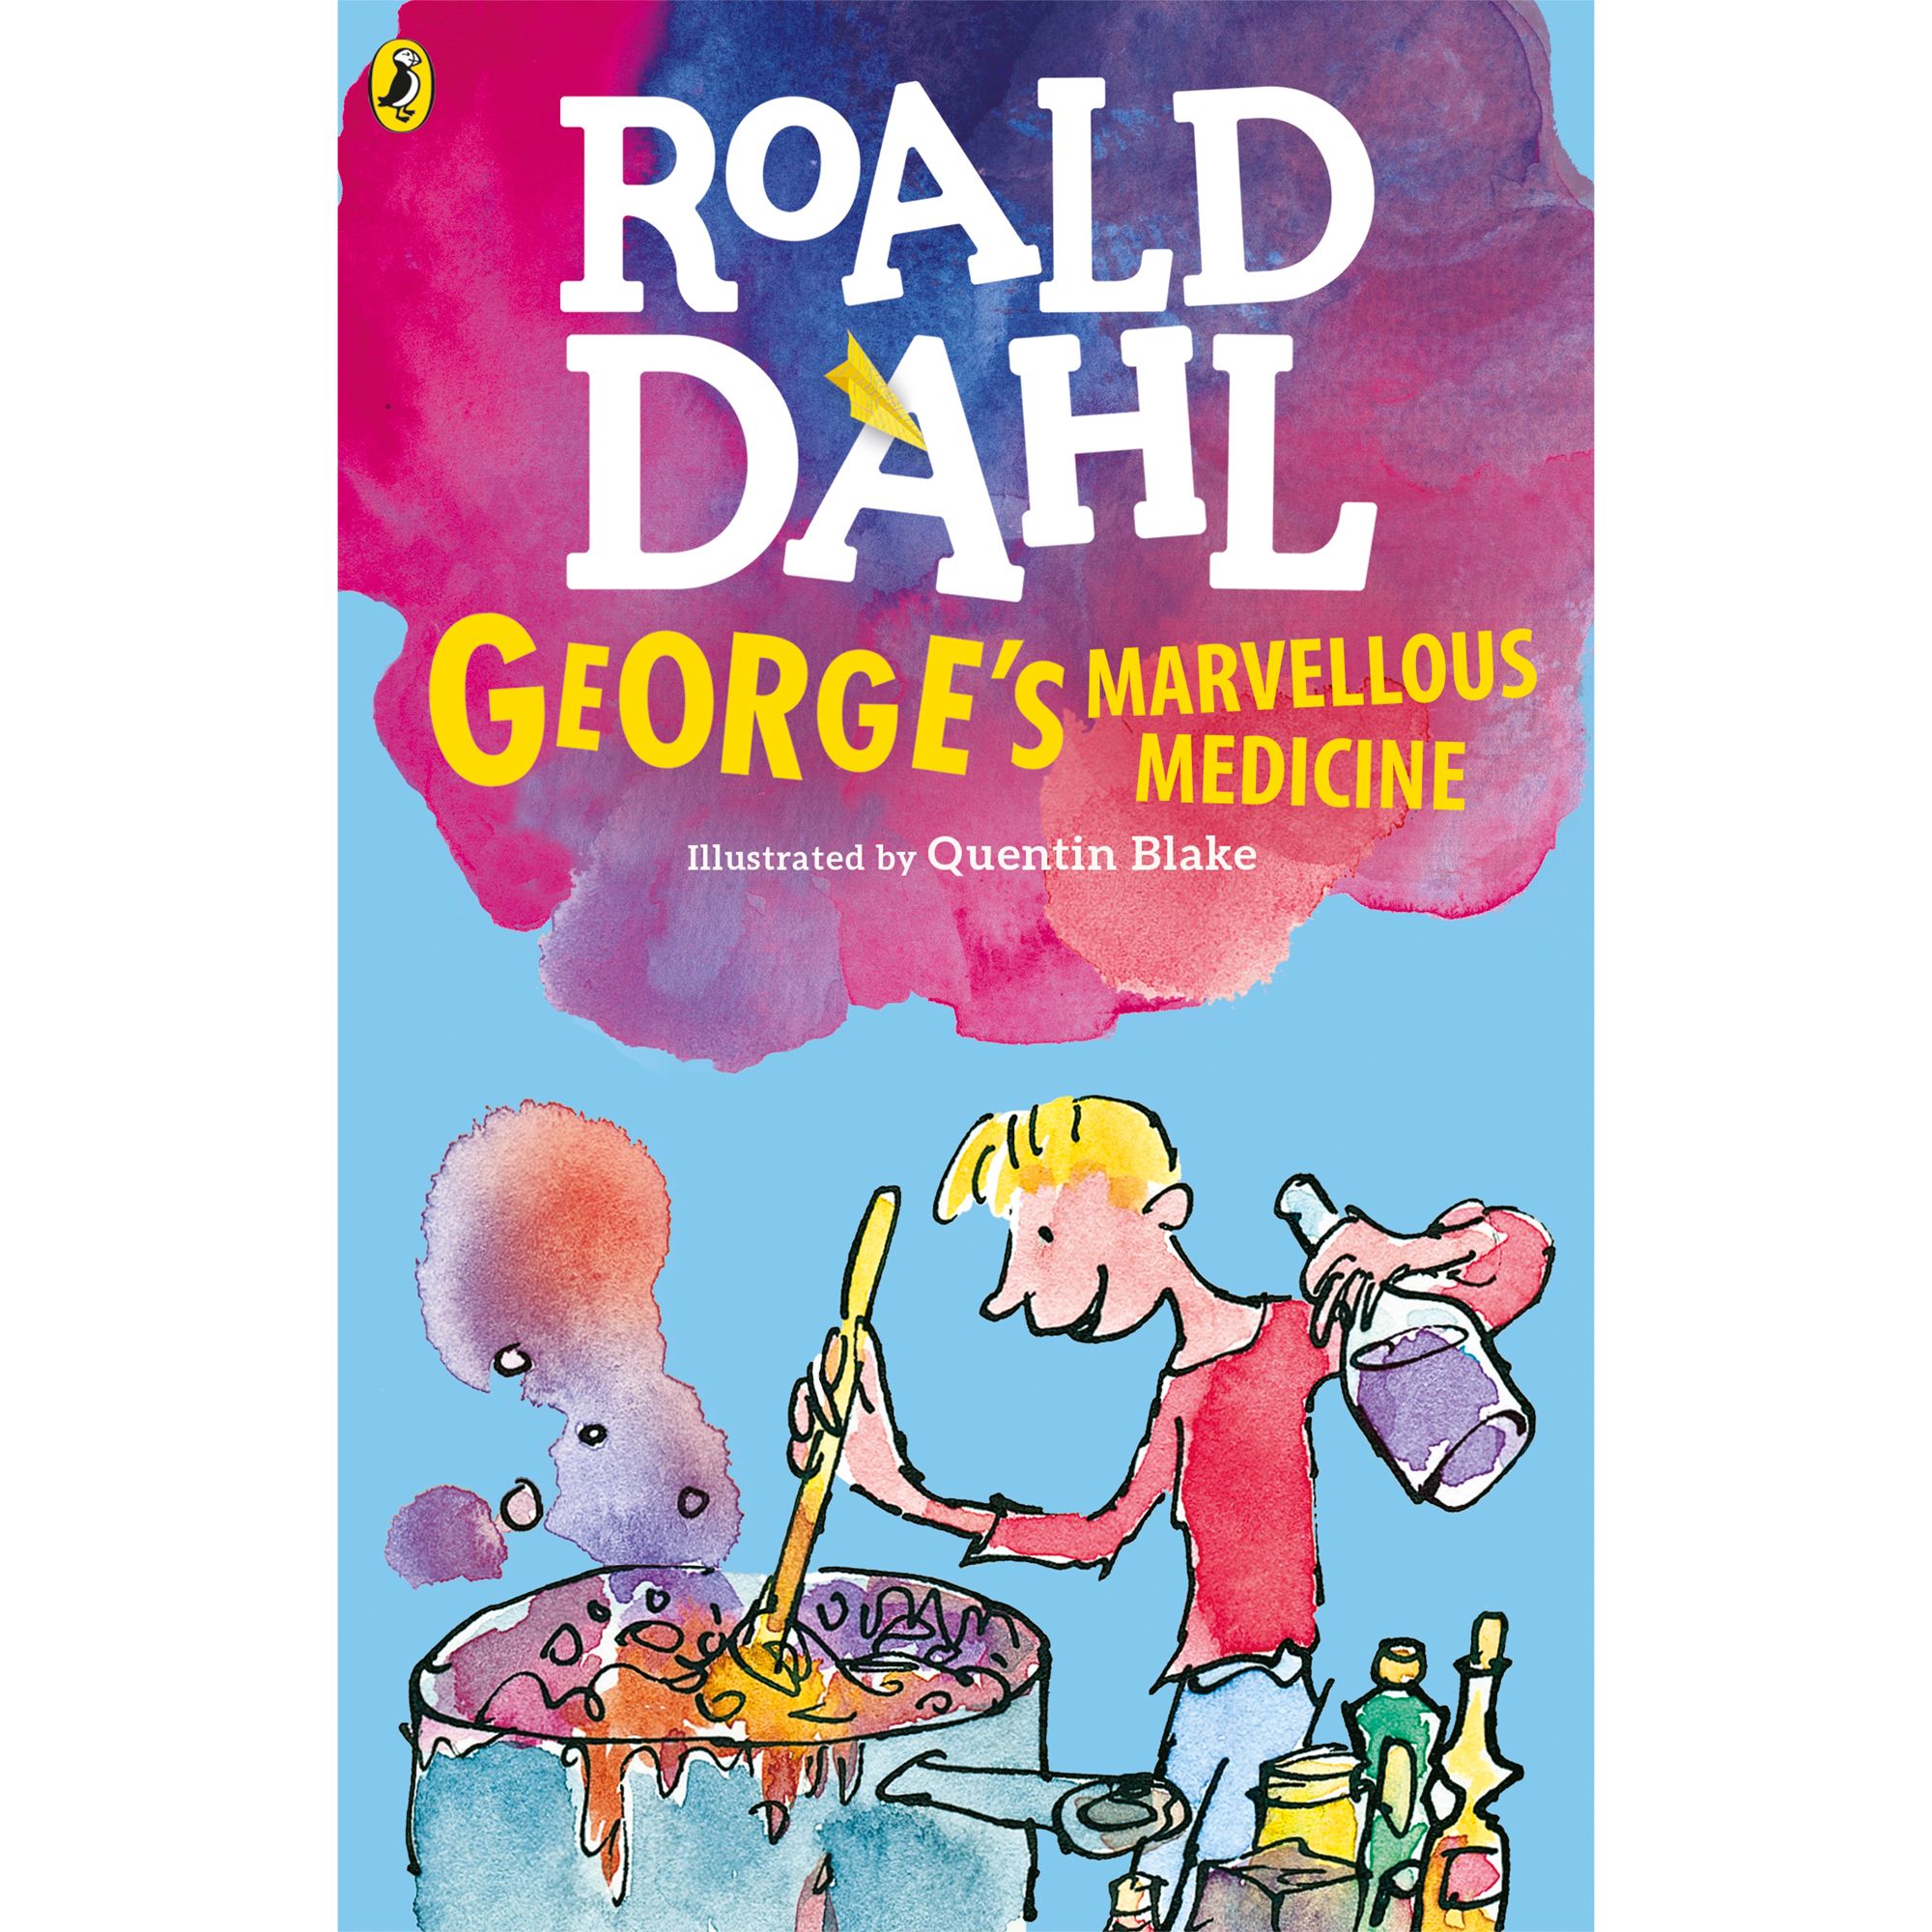 book review on george's marvellous medicine